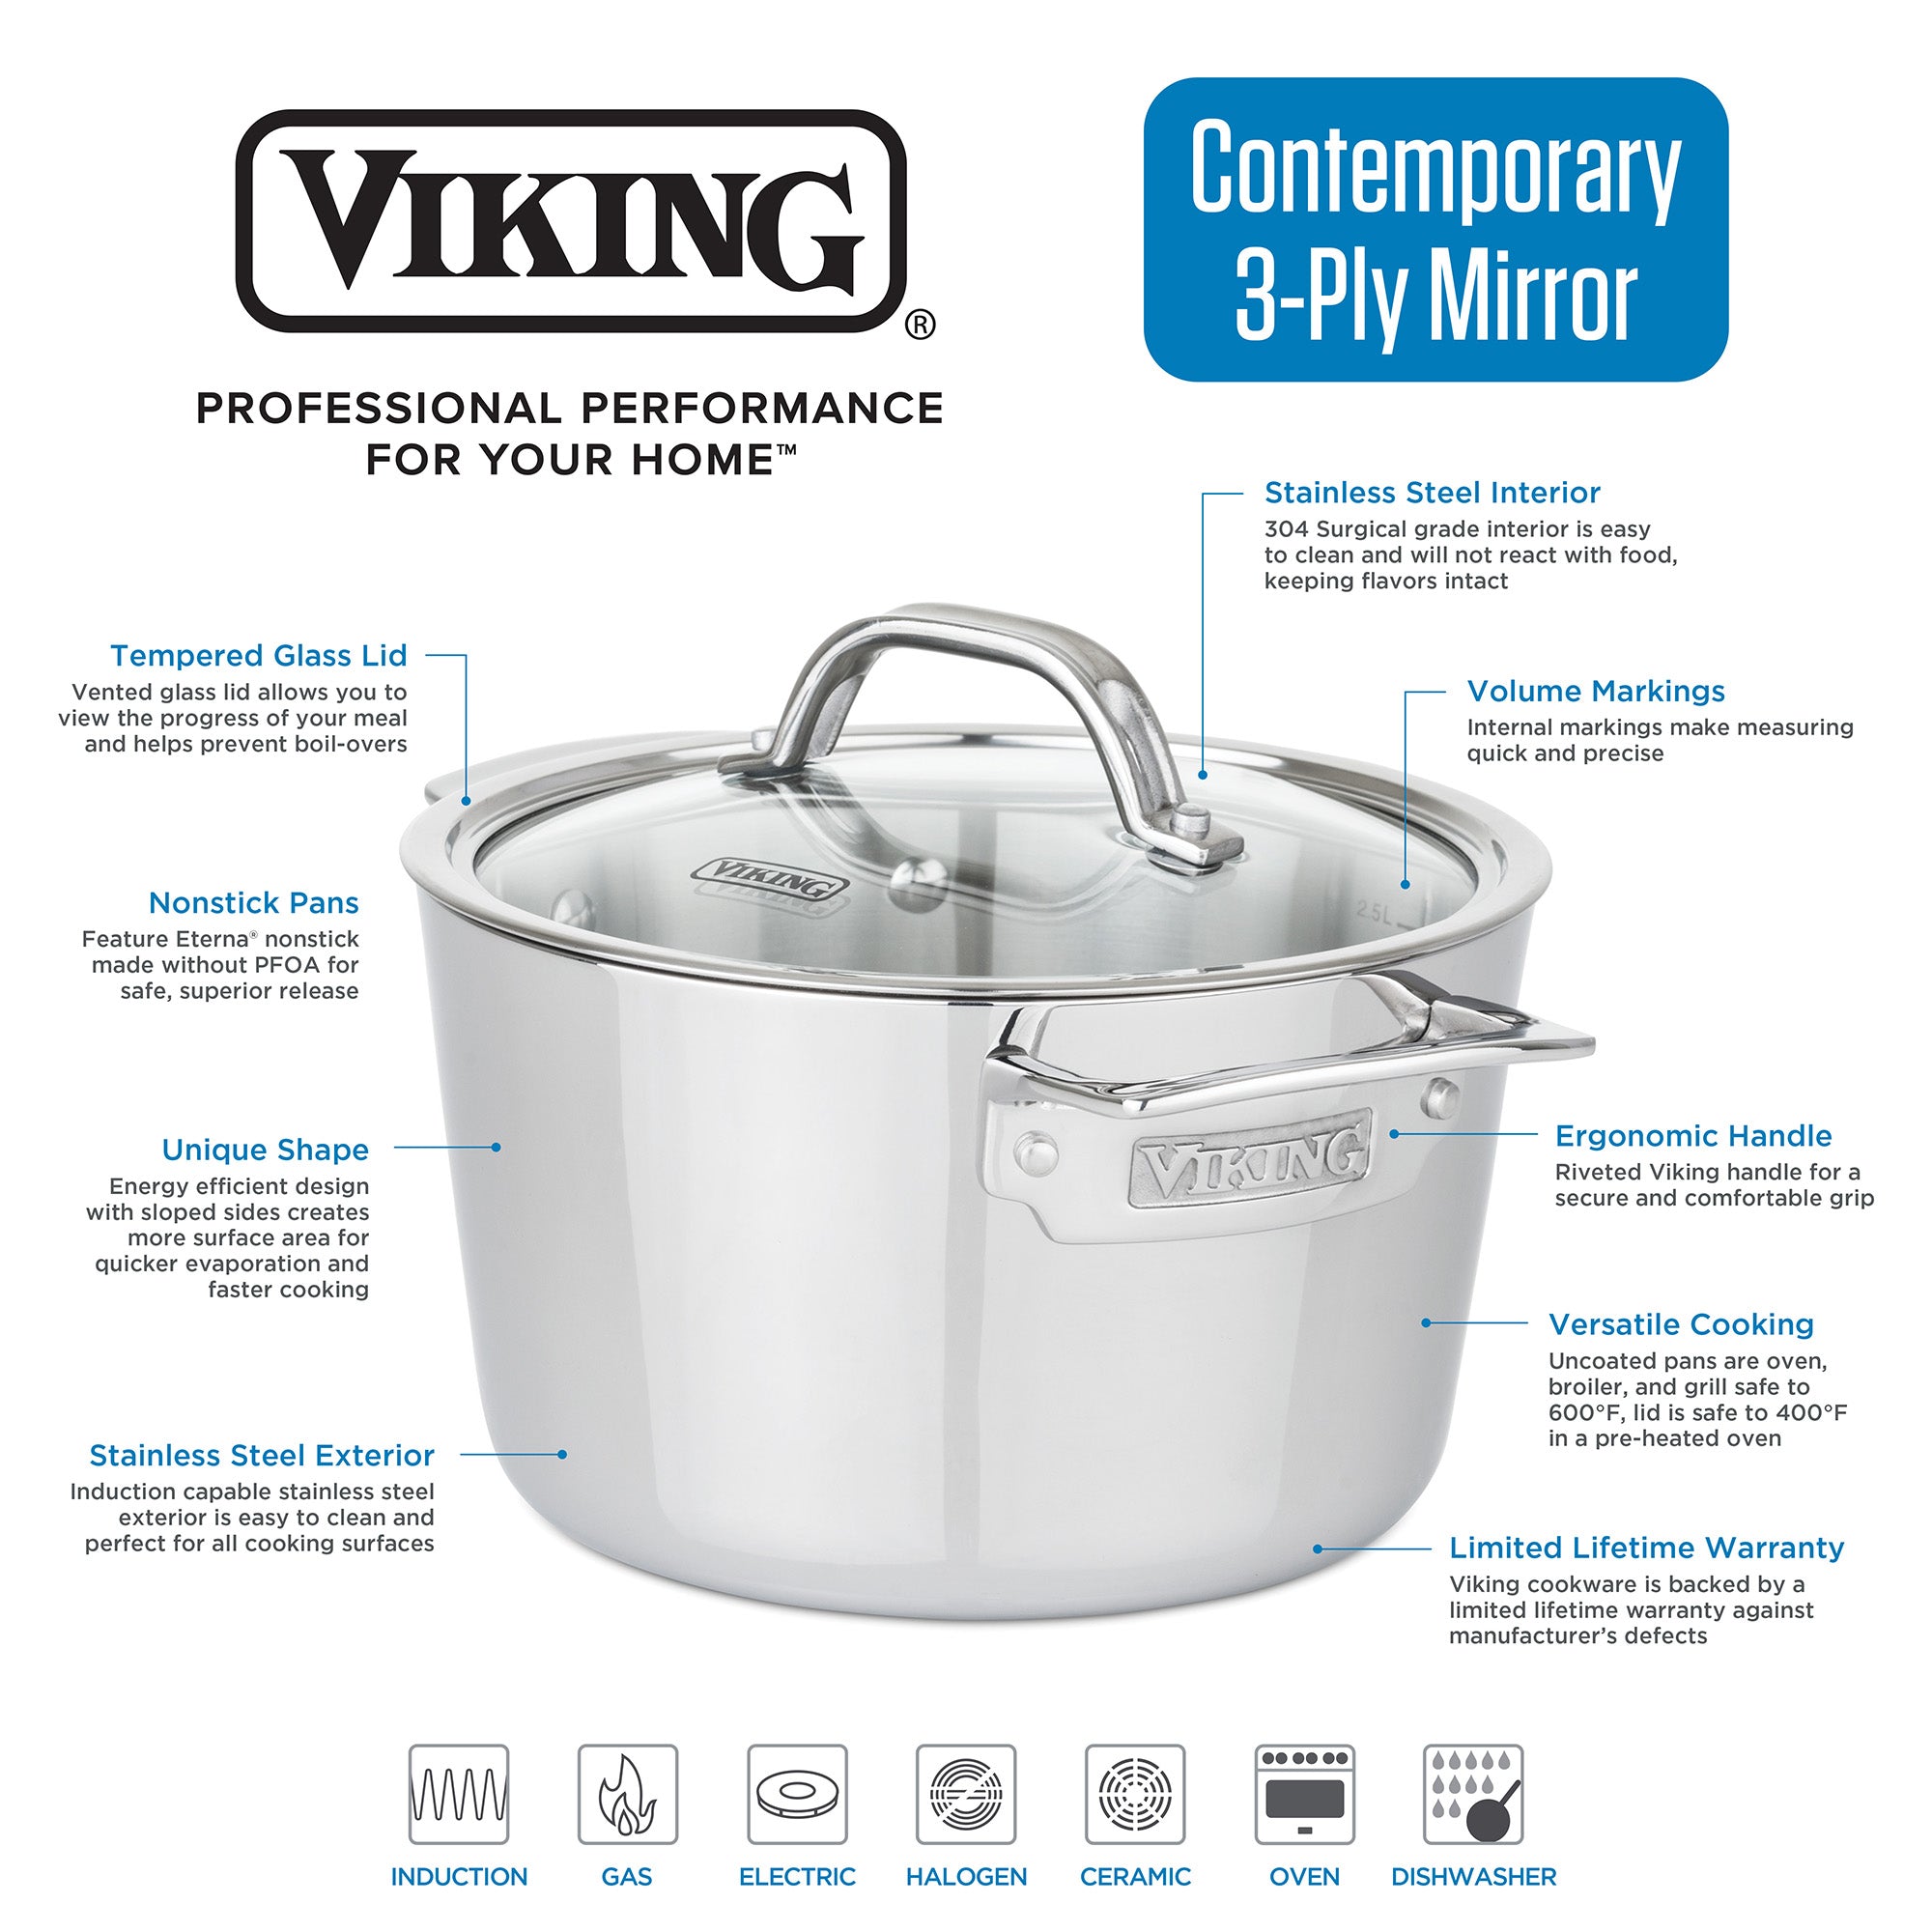 Viking Culinary Contemporary 3-Ply Stainless Steel Cookware Set, 10 Piece,  Dishwasher, Oven Safe, Works on All Cooktops including Induction,Silver